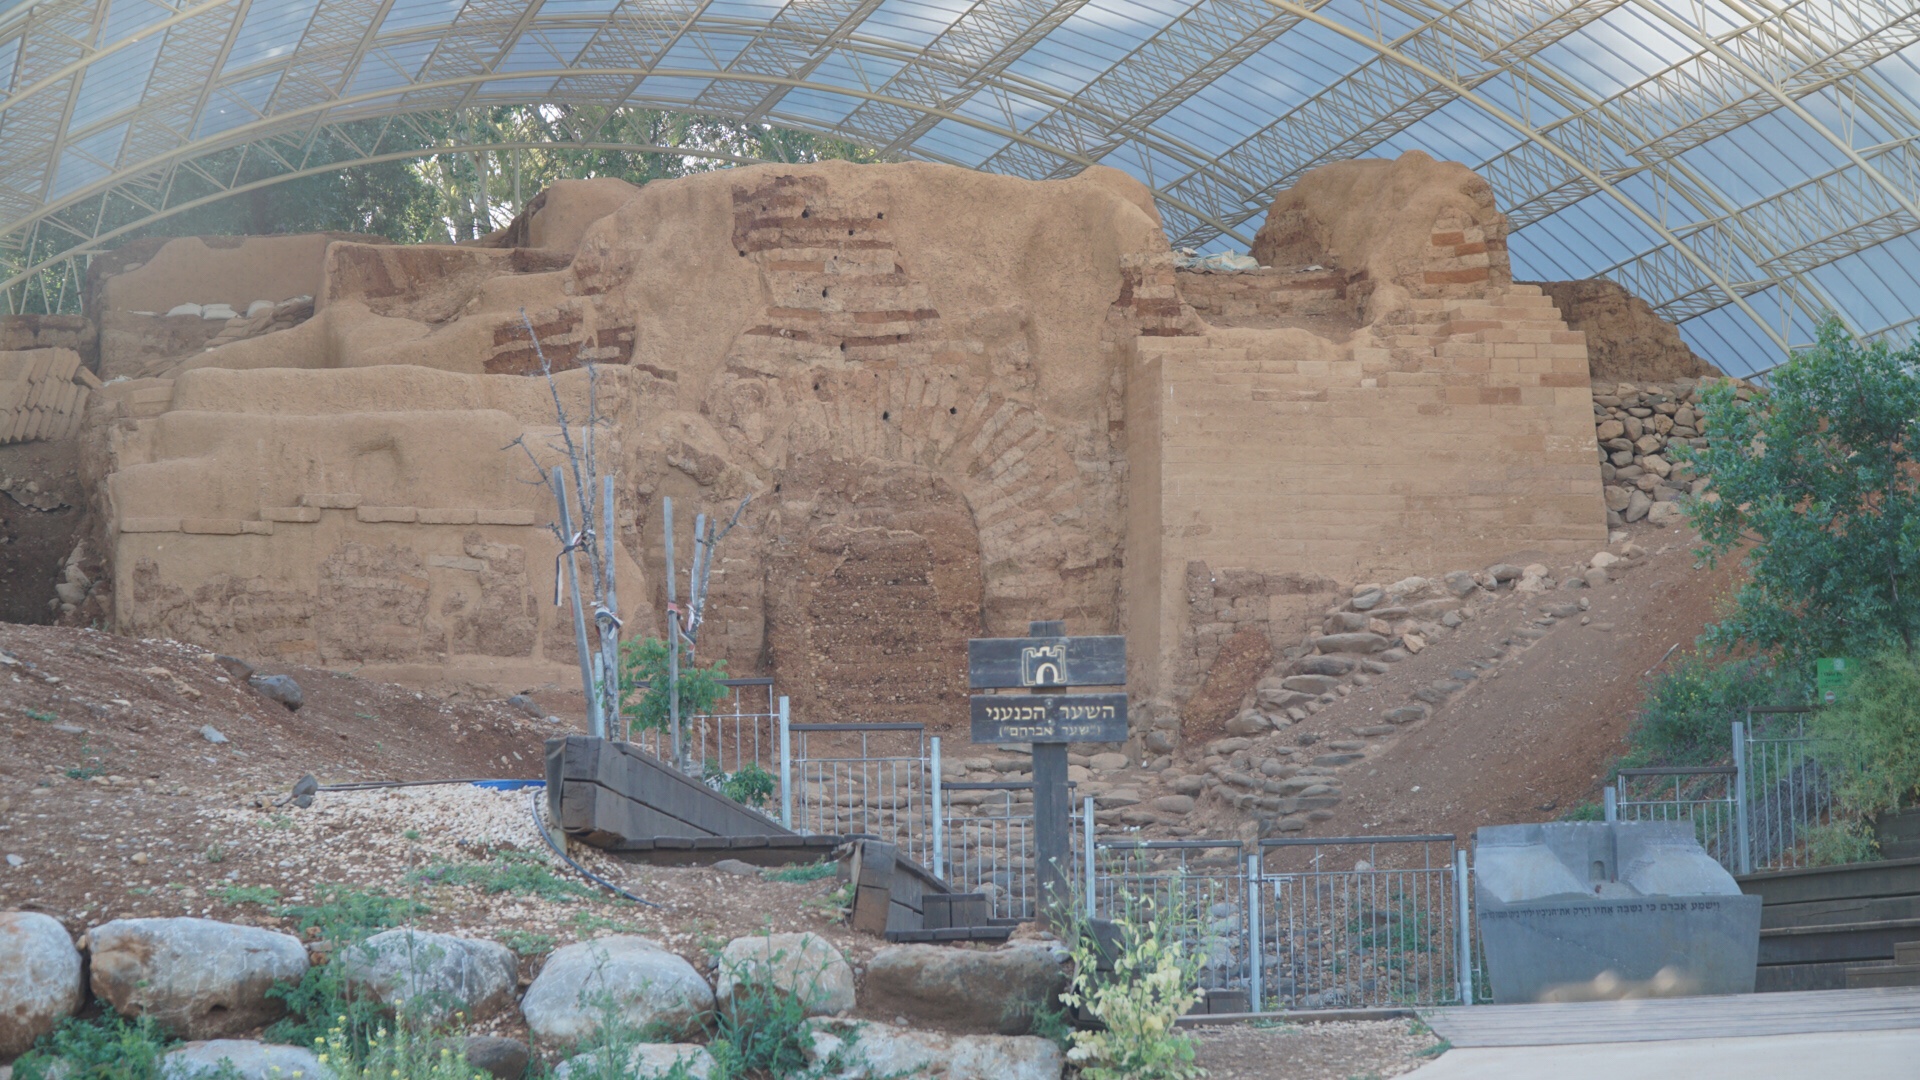 4000 year old Clay Gate at Tel Dan - Abraham could have walked through.